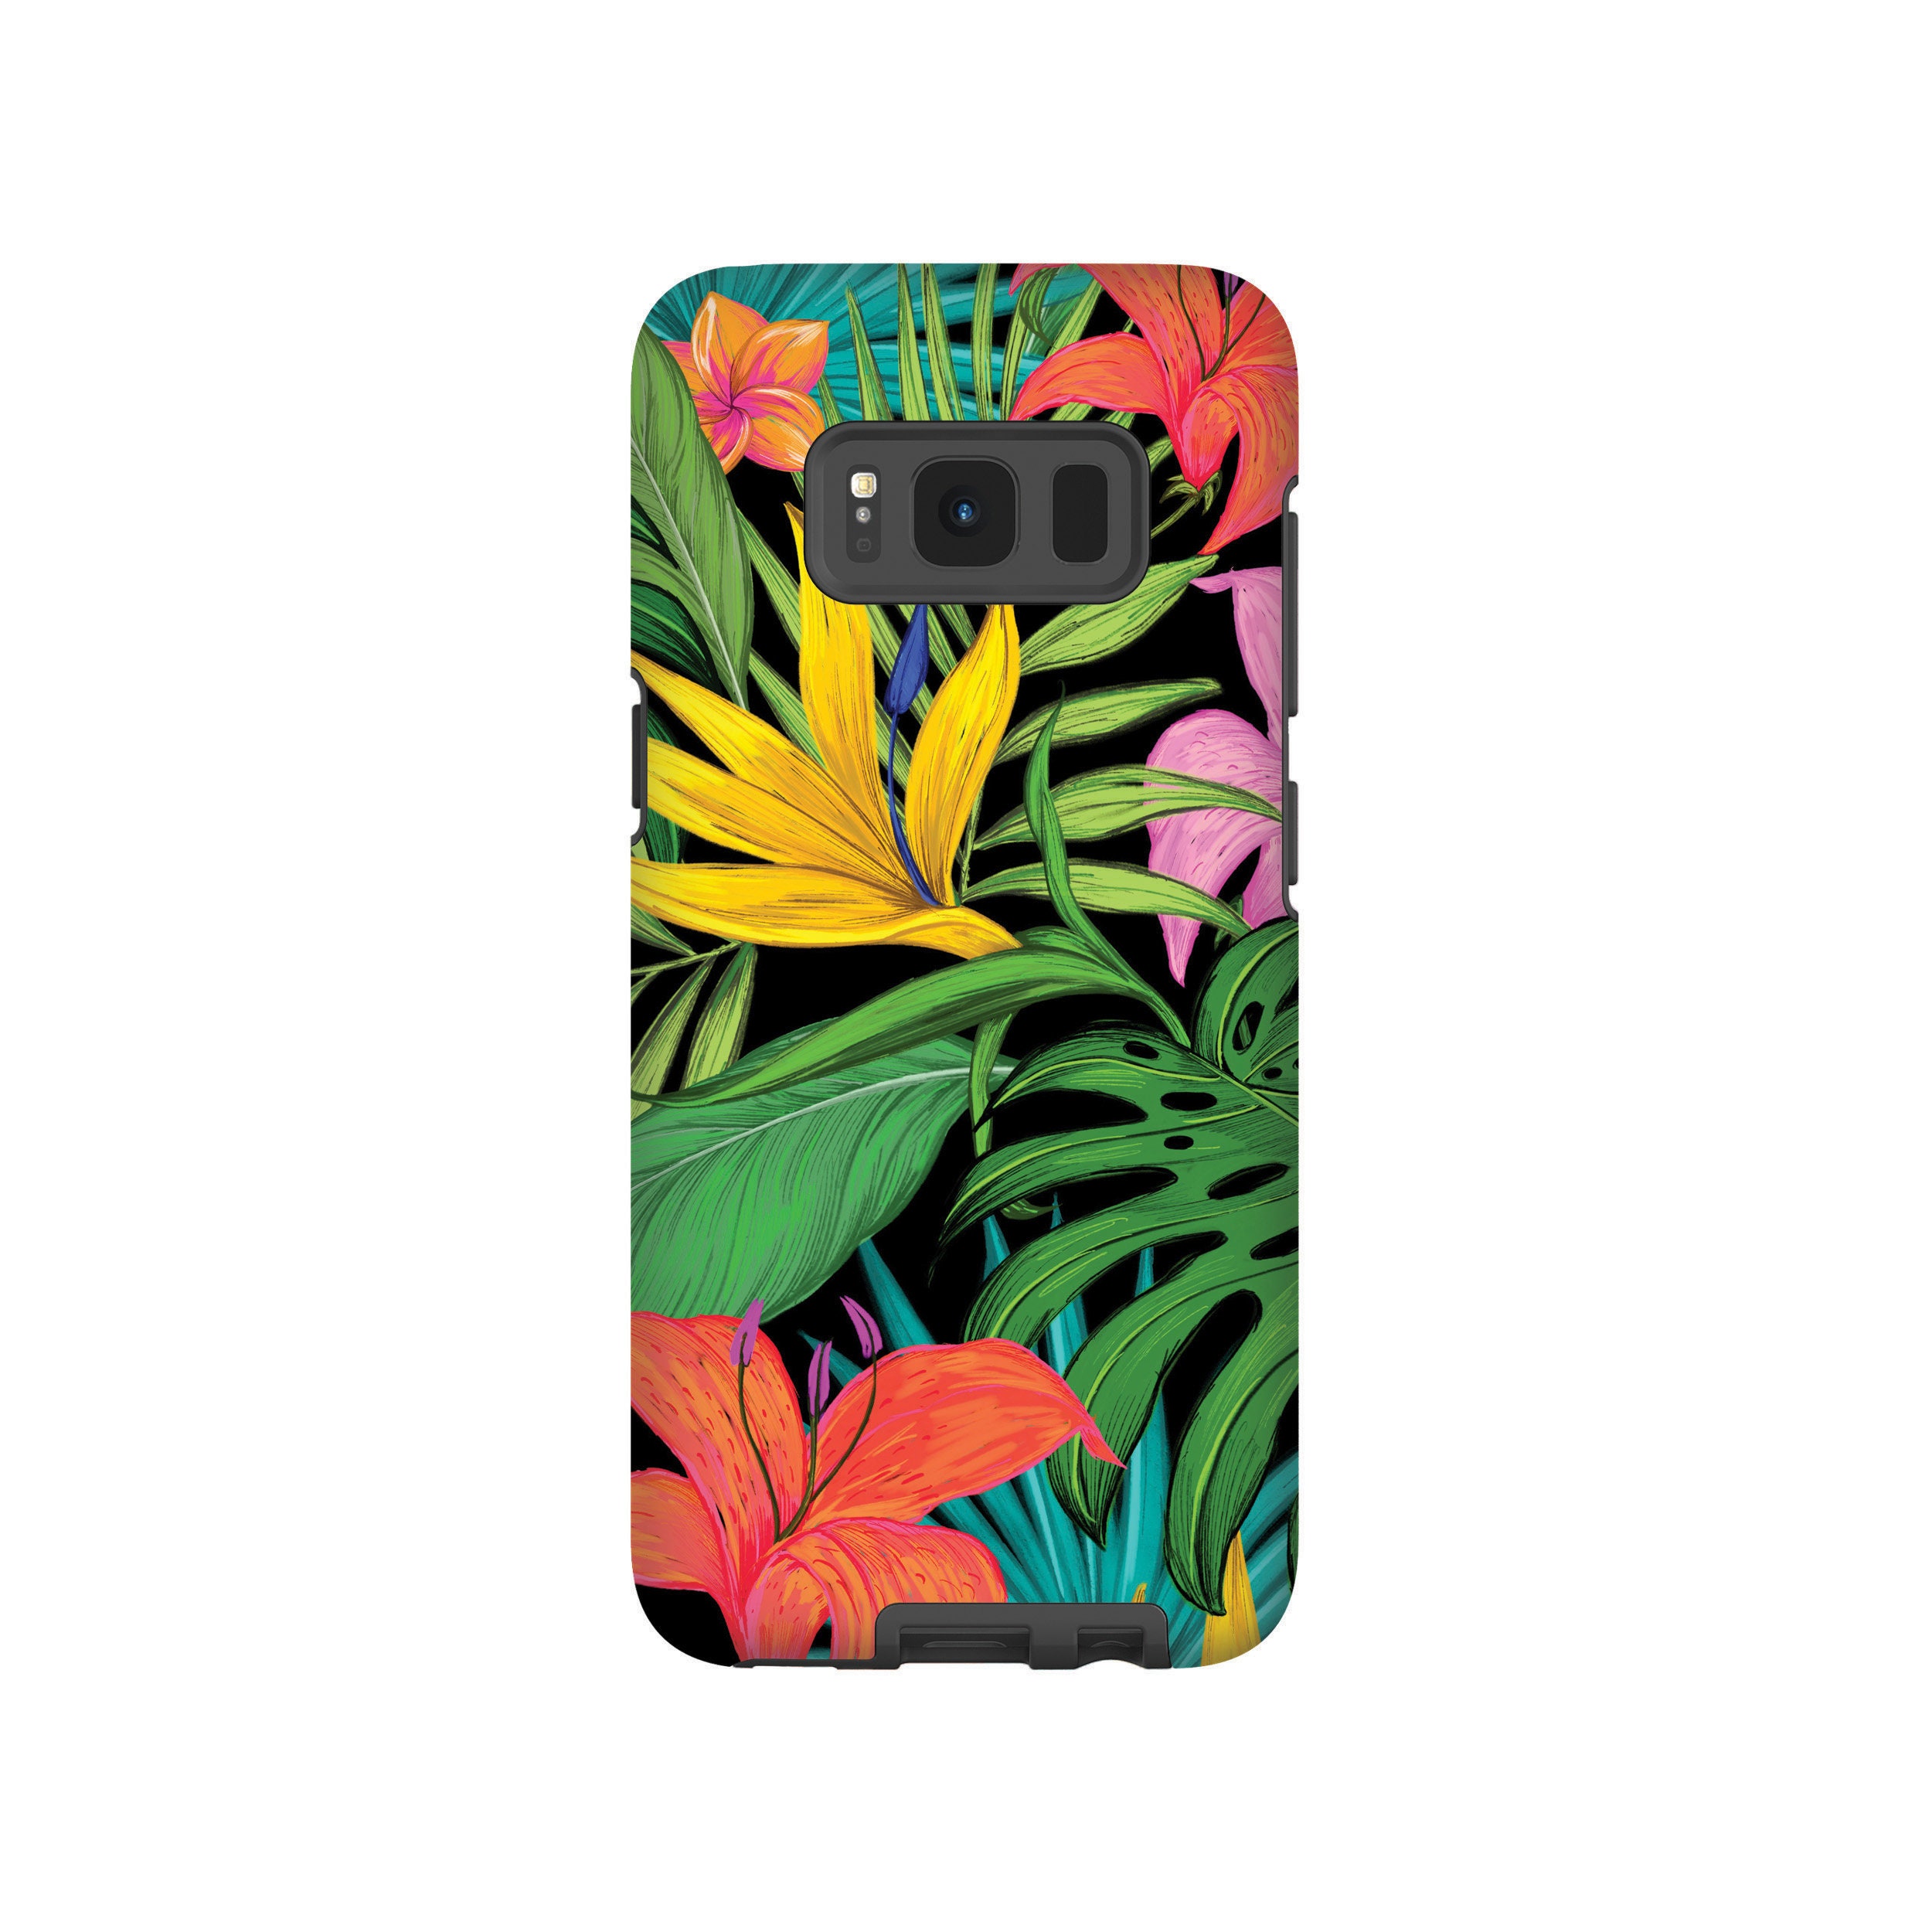 Tropical Phone Case iPhone 8 X Xs Xr Samsung Galaxy S9 S10 | Etsy